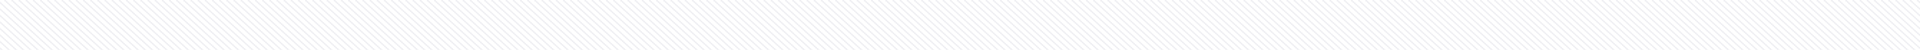 A black and blue striped background with some type of pattern